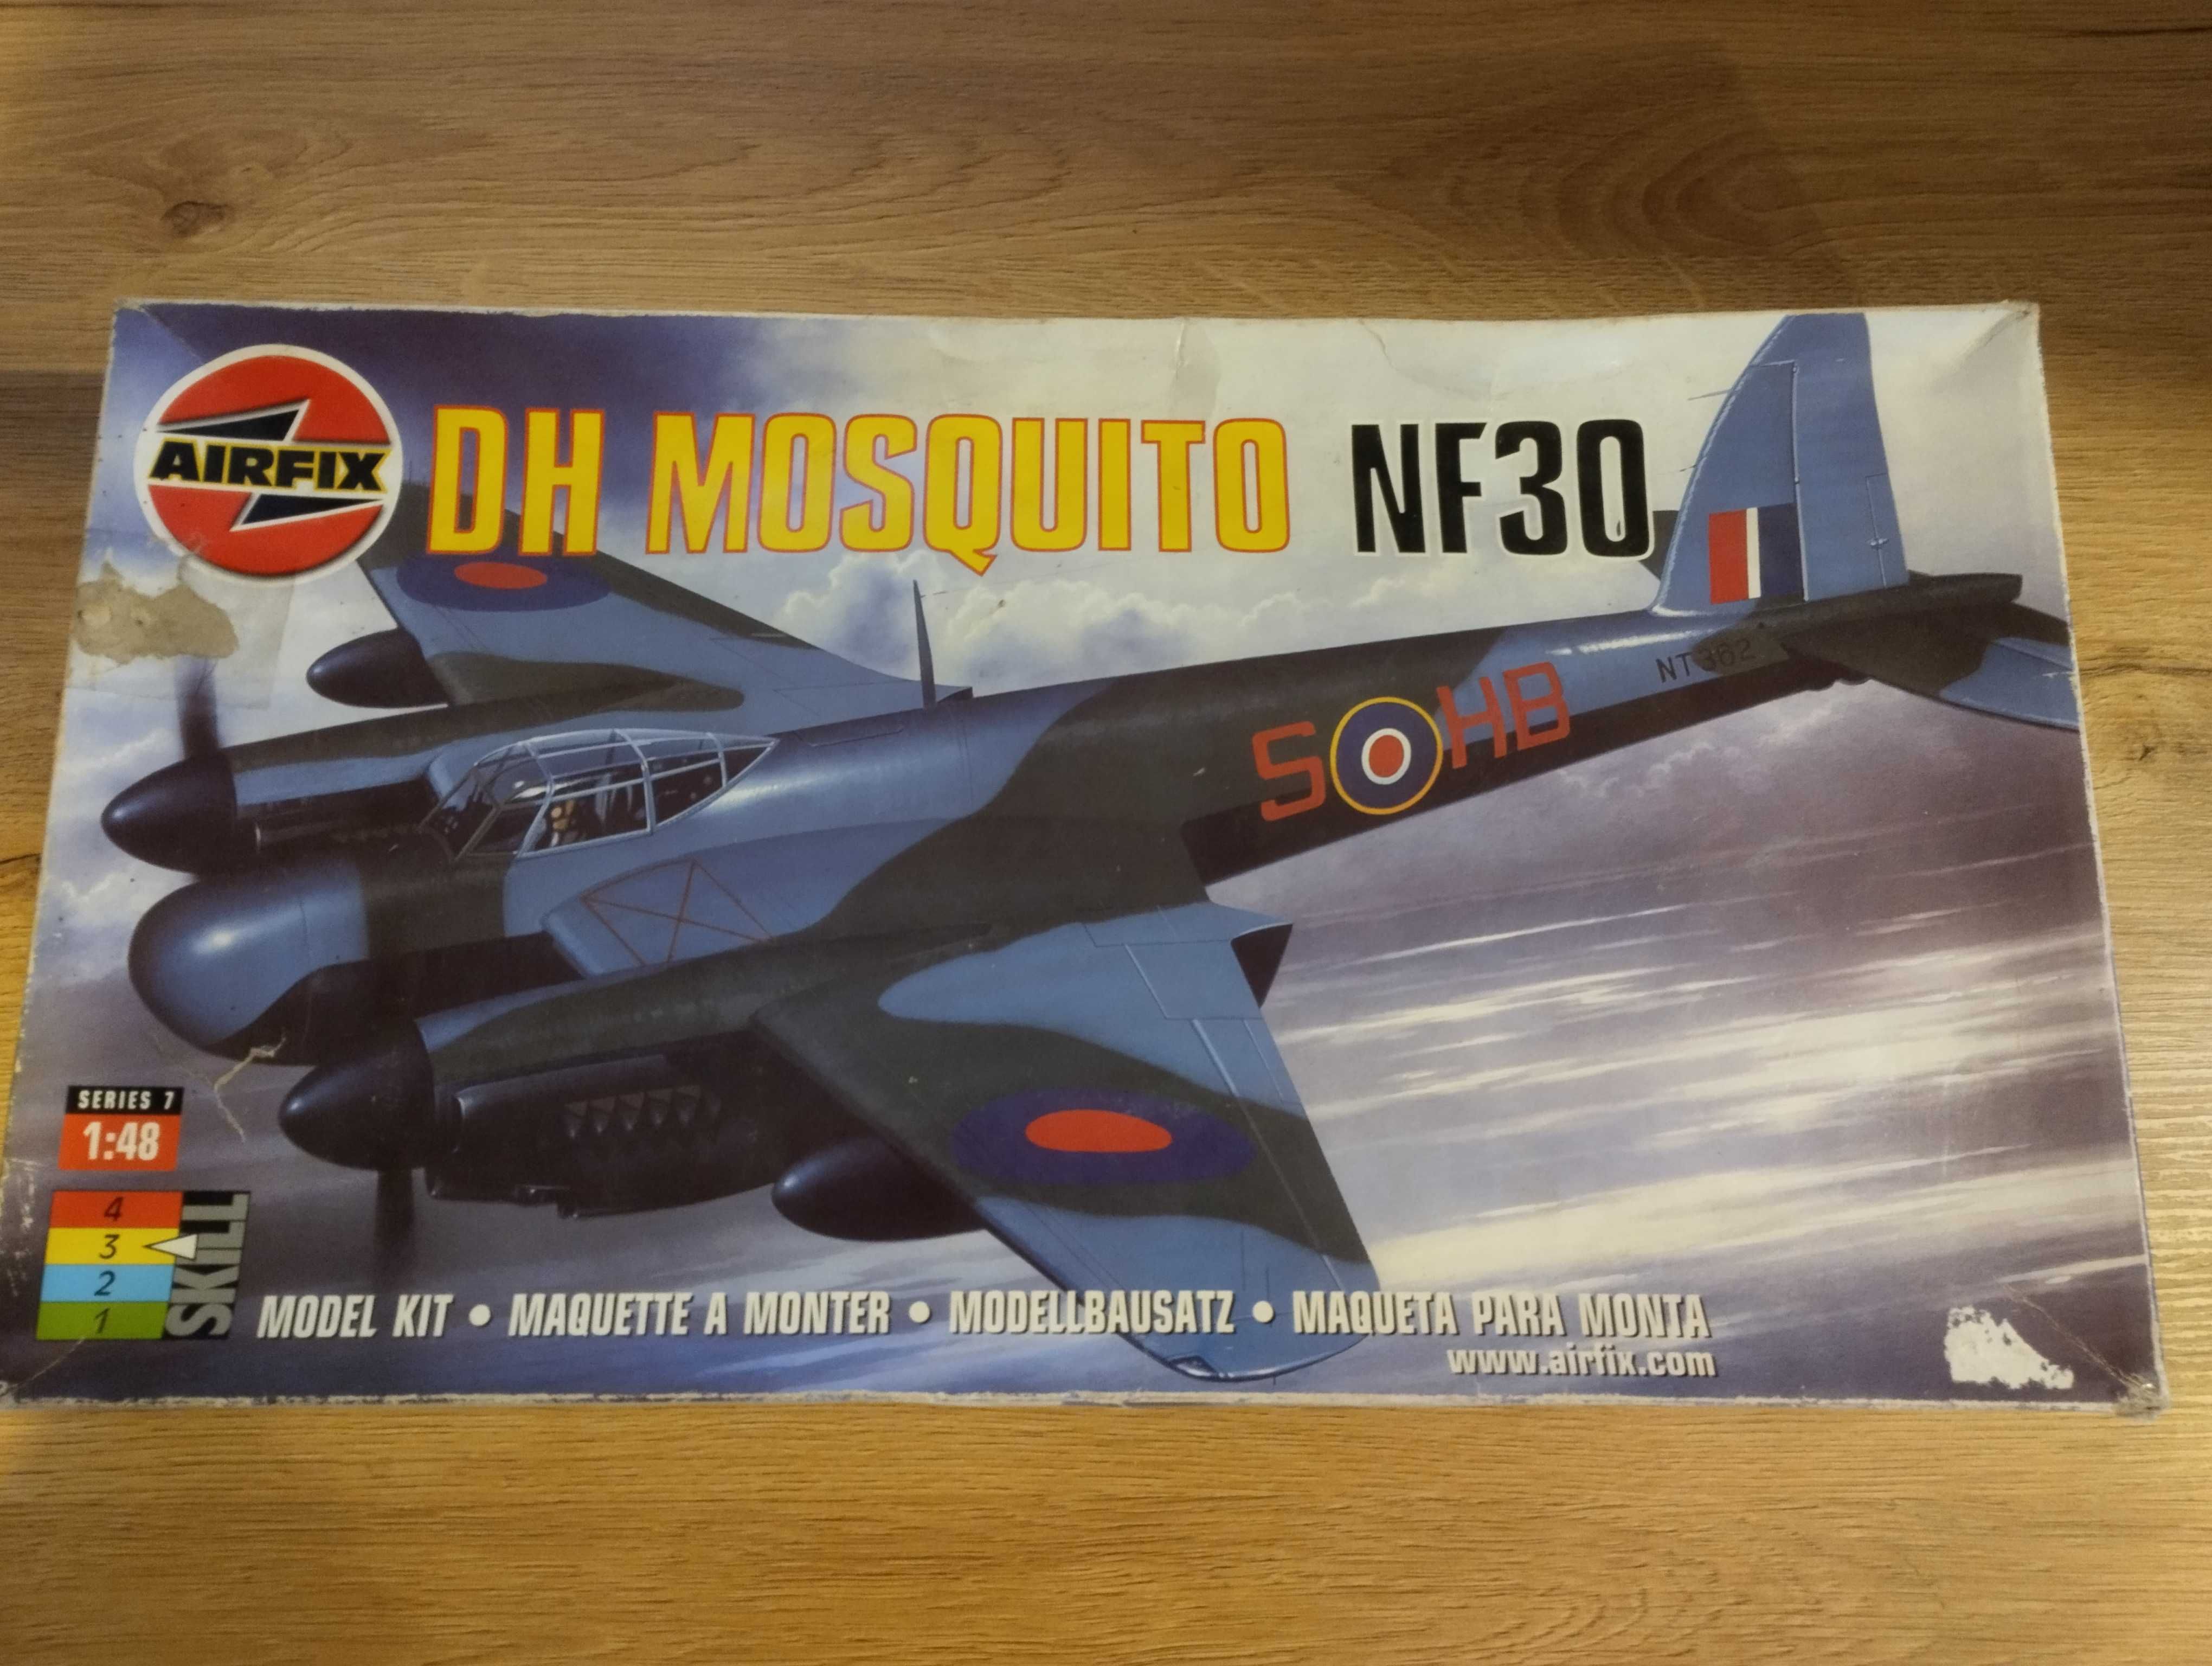 Samolot DH MOSQUITO NF 30 - firmy Airfix